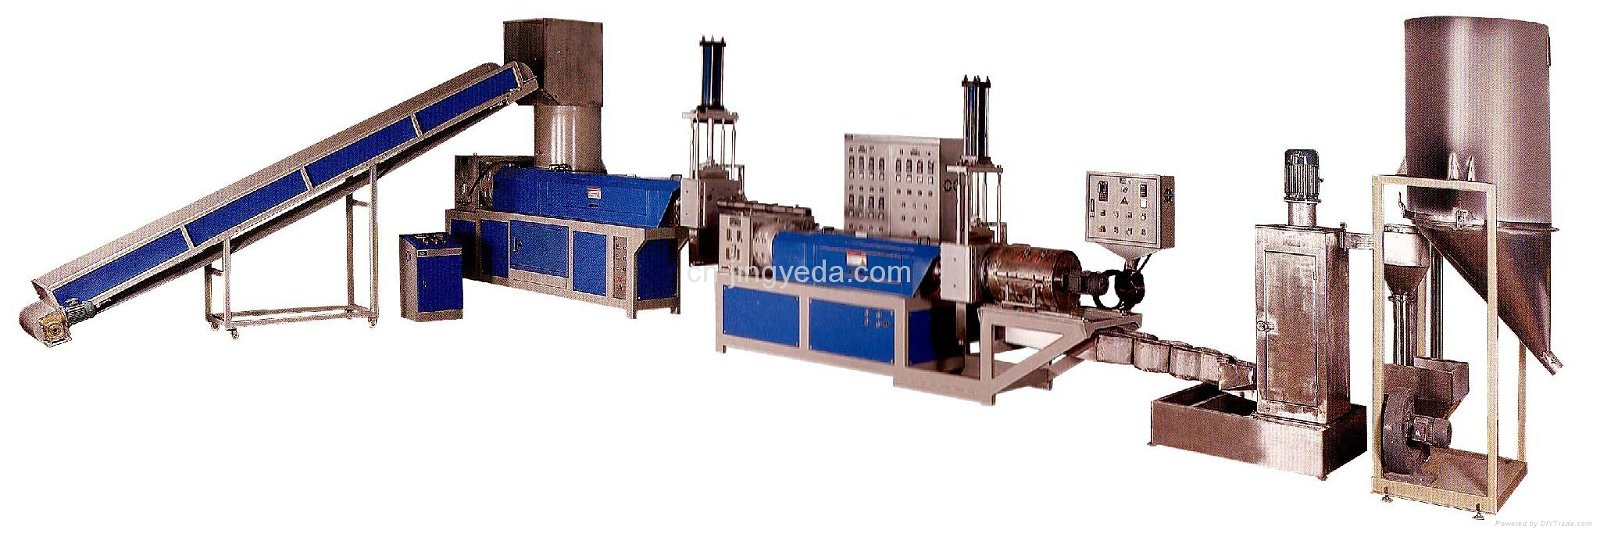 Agglomerator Recycling Line 2